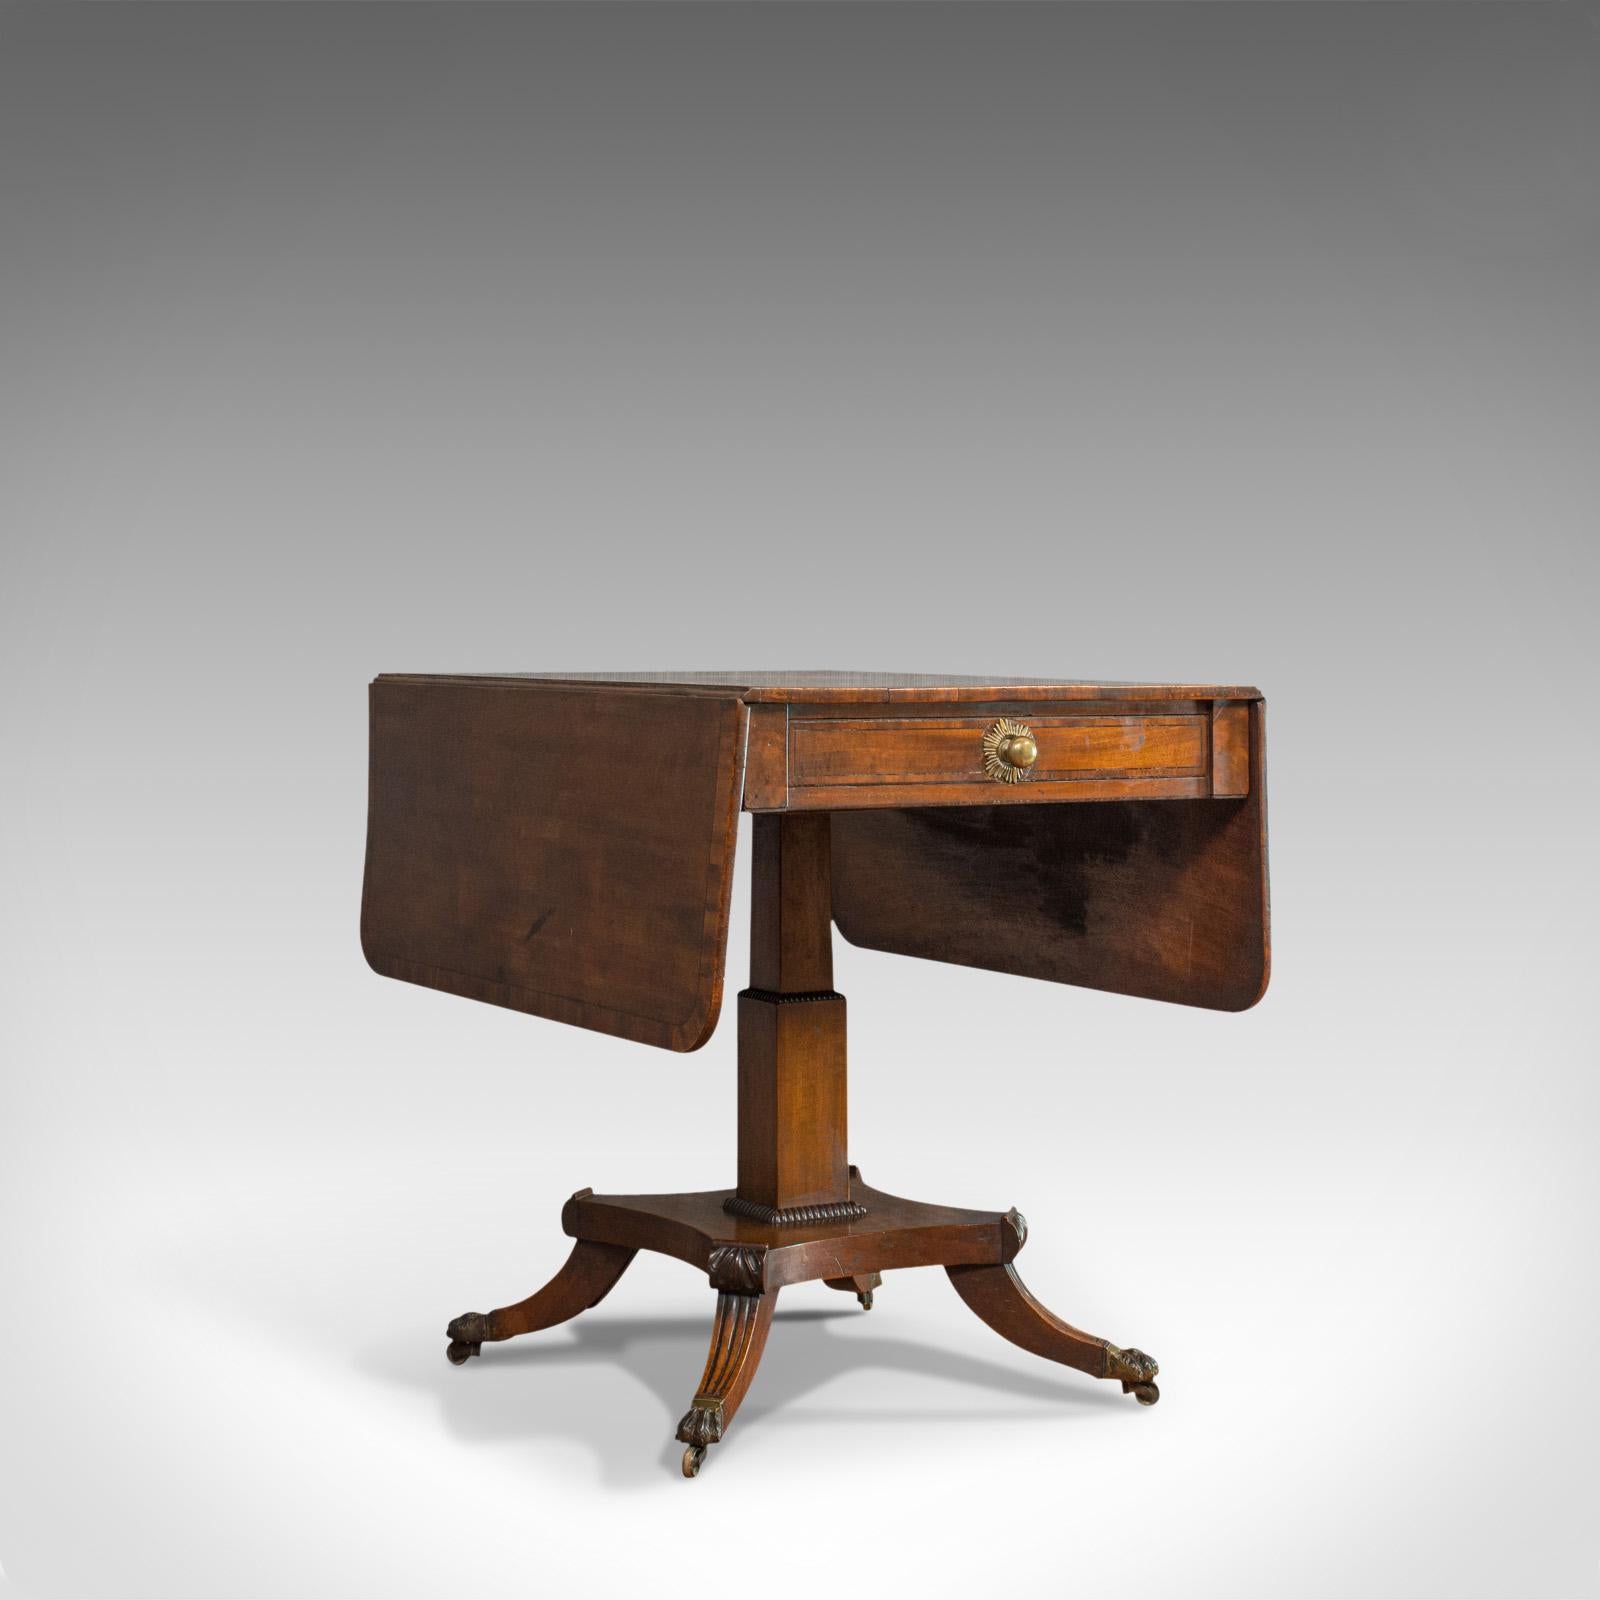 This is an antique Pembroke table. An English, mahogany drop-leaf occasional table dating to the Regency period, circa 1830.

Select mahogany displays fine grain interest and a desirable aged patina
Good consistent color throughout to its wax